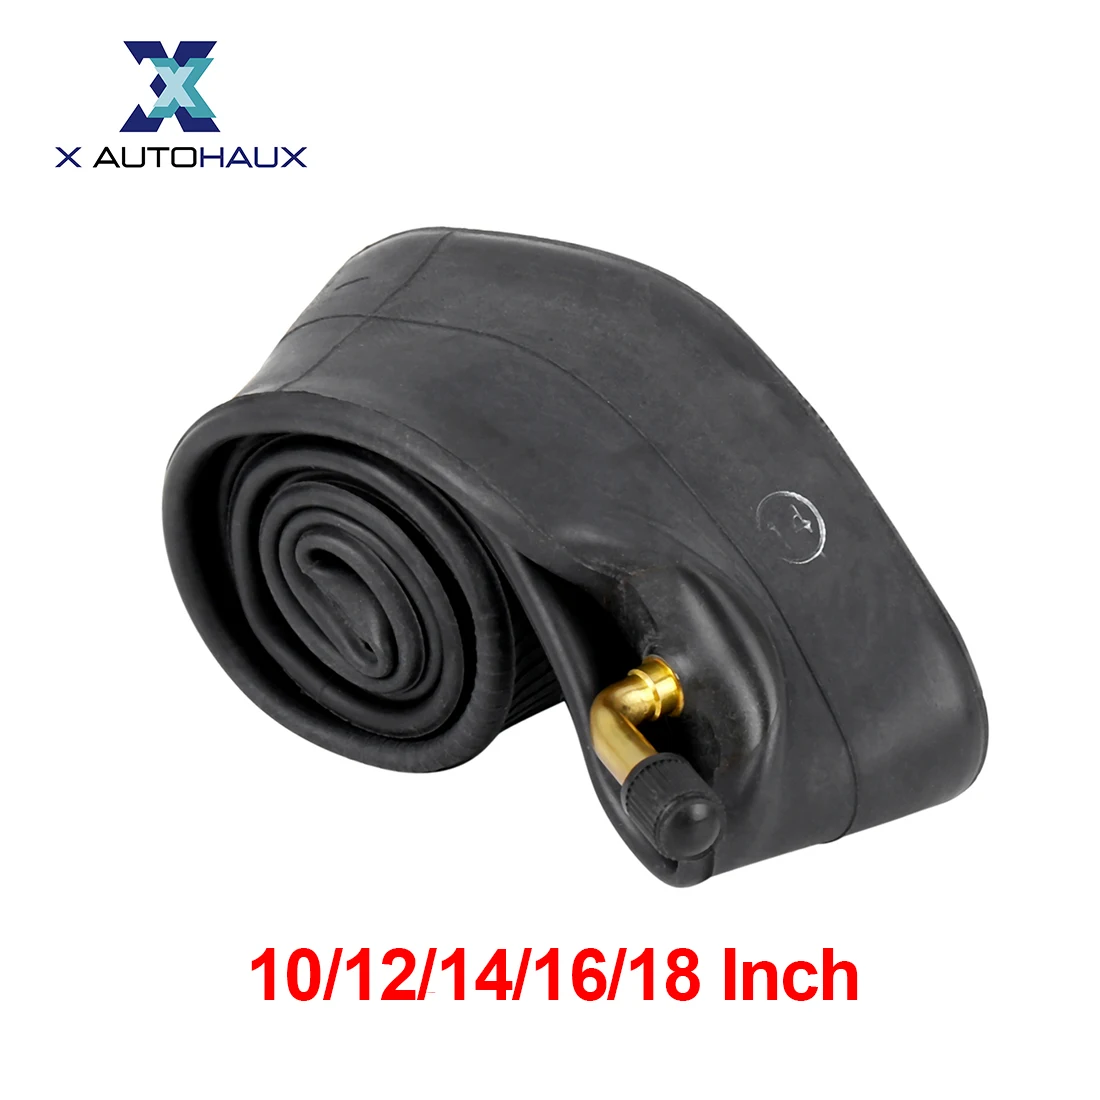 X Autohaux Bike Inner Tube 10/12/14/16/18 Inch Bent US Valve Bicycle Tire Tyre 2.125/2.5 Width Cycling Rubber Tube For Bicycle